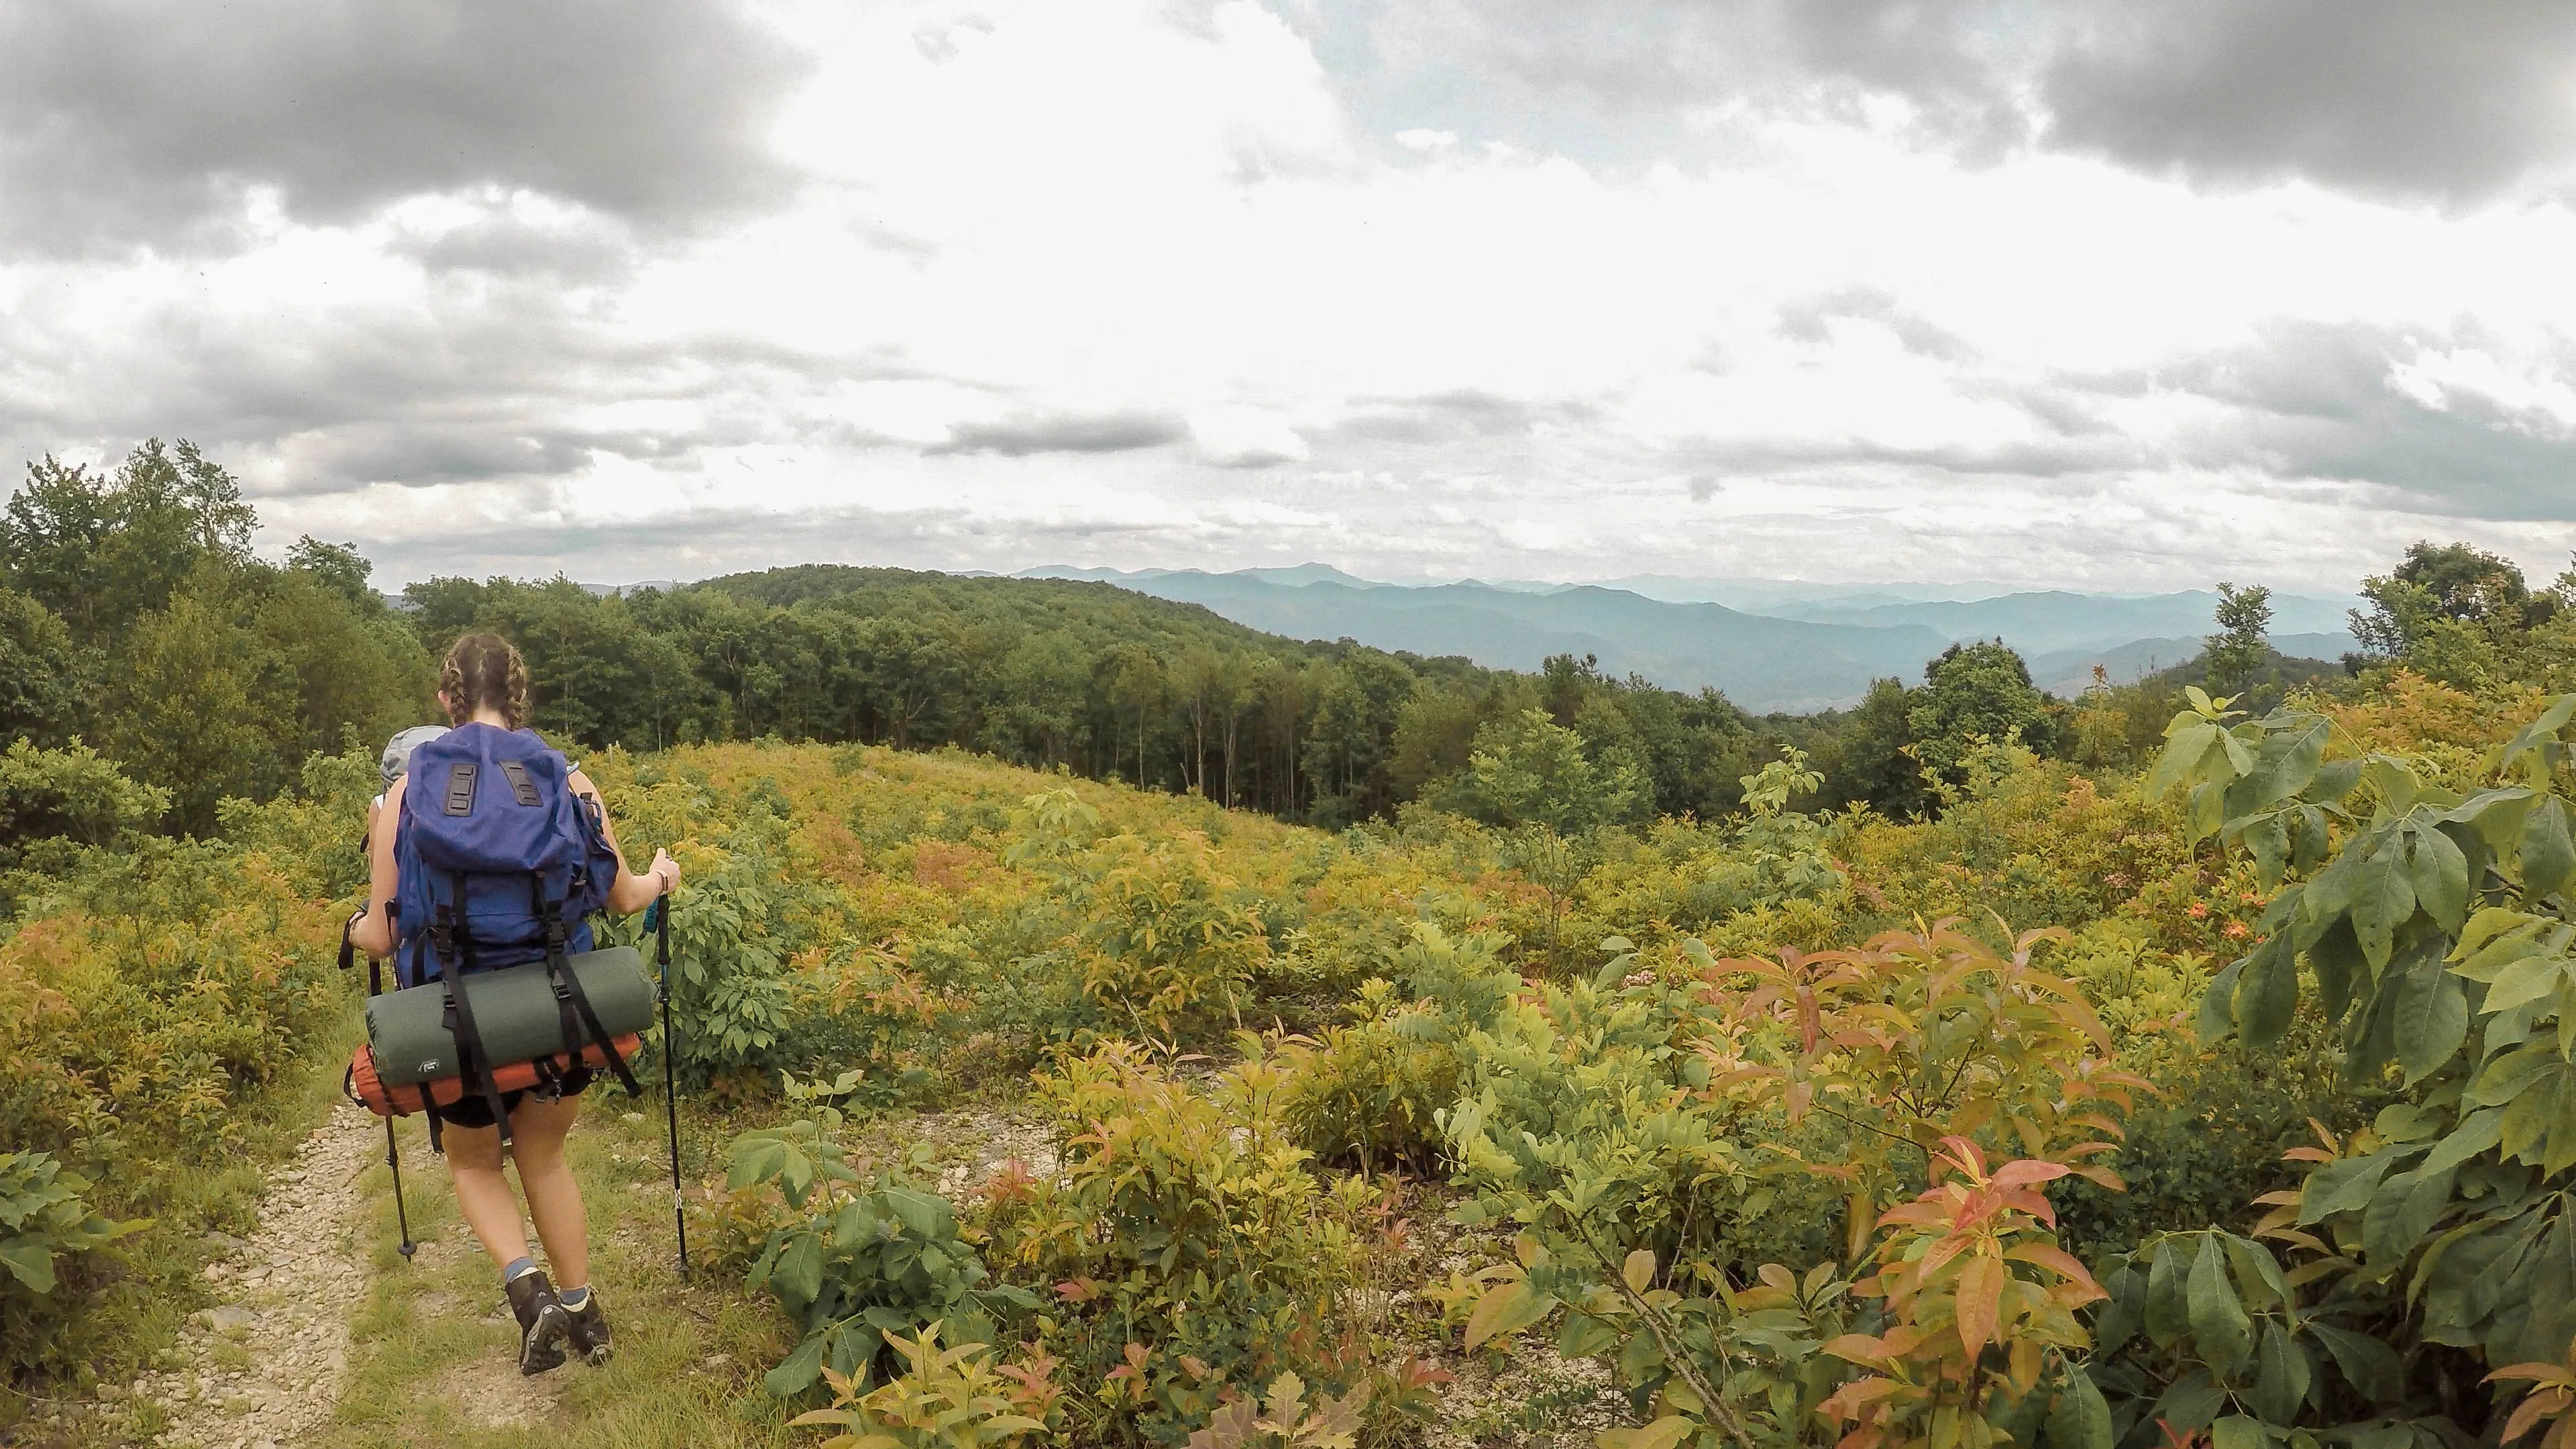 Backpacking: A girl moves forward during a 2 day 30 mile trip on the Appalachian Trail. 3840x2160 4K Wallpaper.